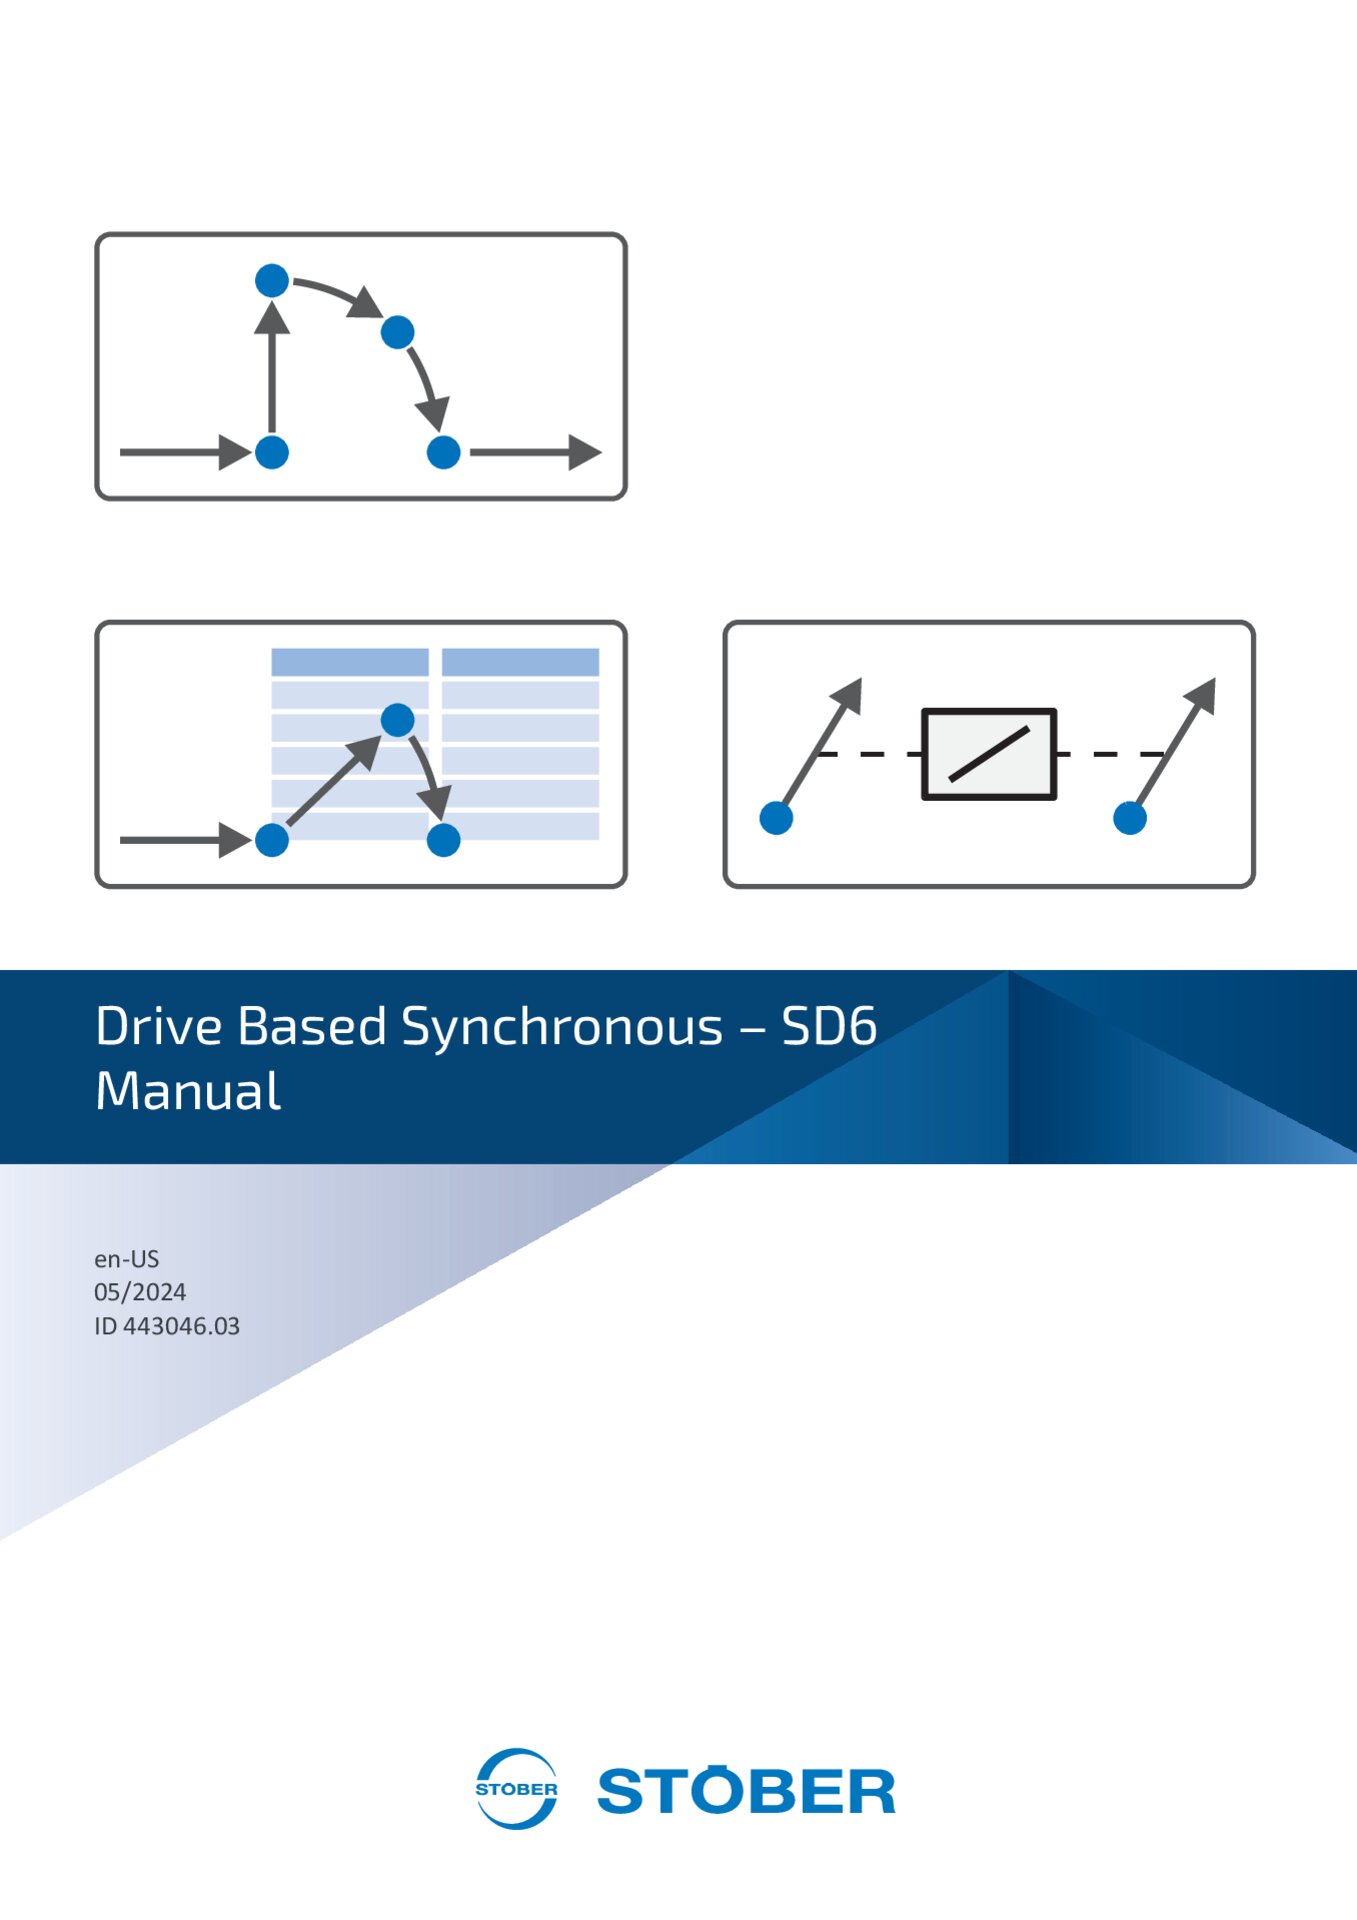 Manual Drive Based Synchronous – SD6